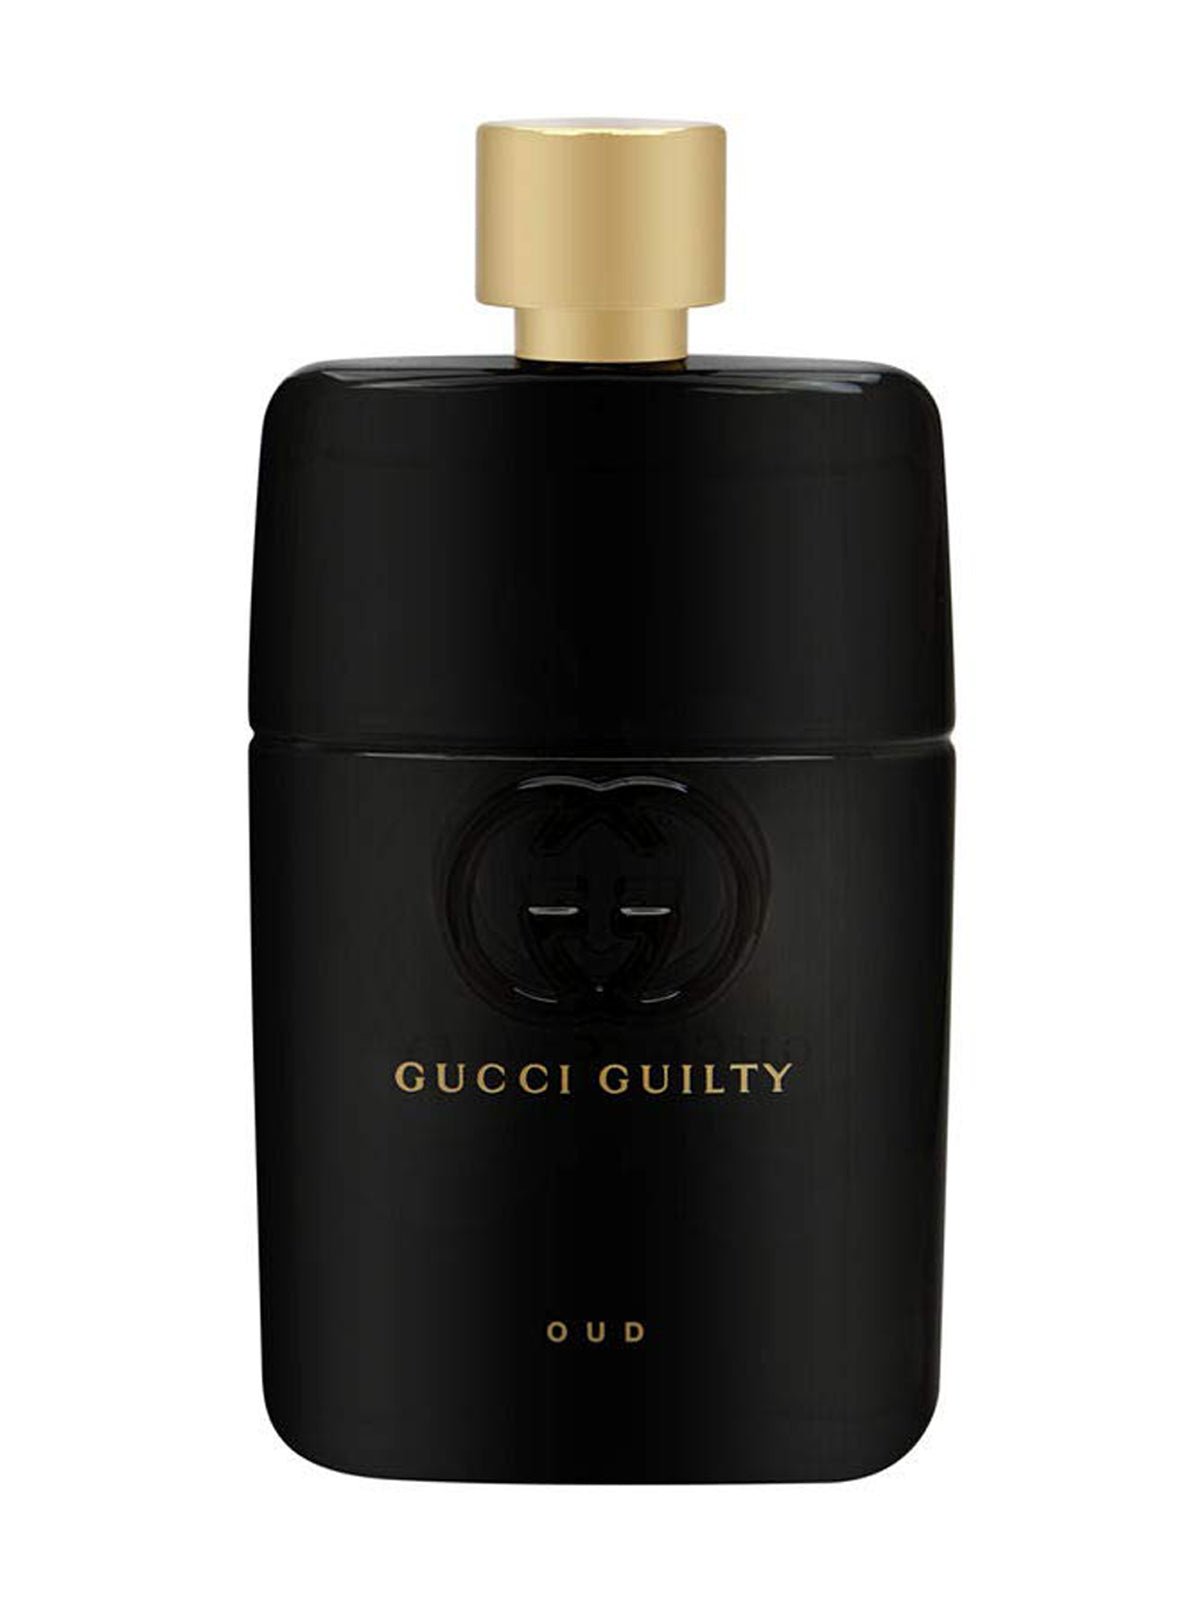 Gucci Guilty Oud For Men Edp 90Ml - AllurebeautypkGucci Guilty Oud For Men Edp 90Ml